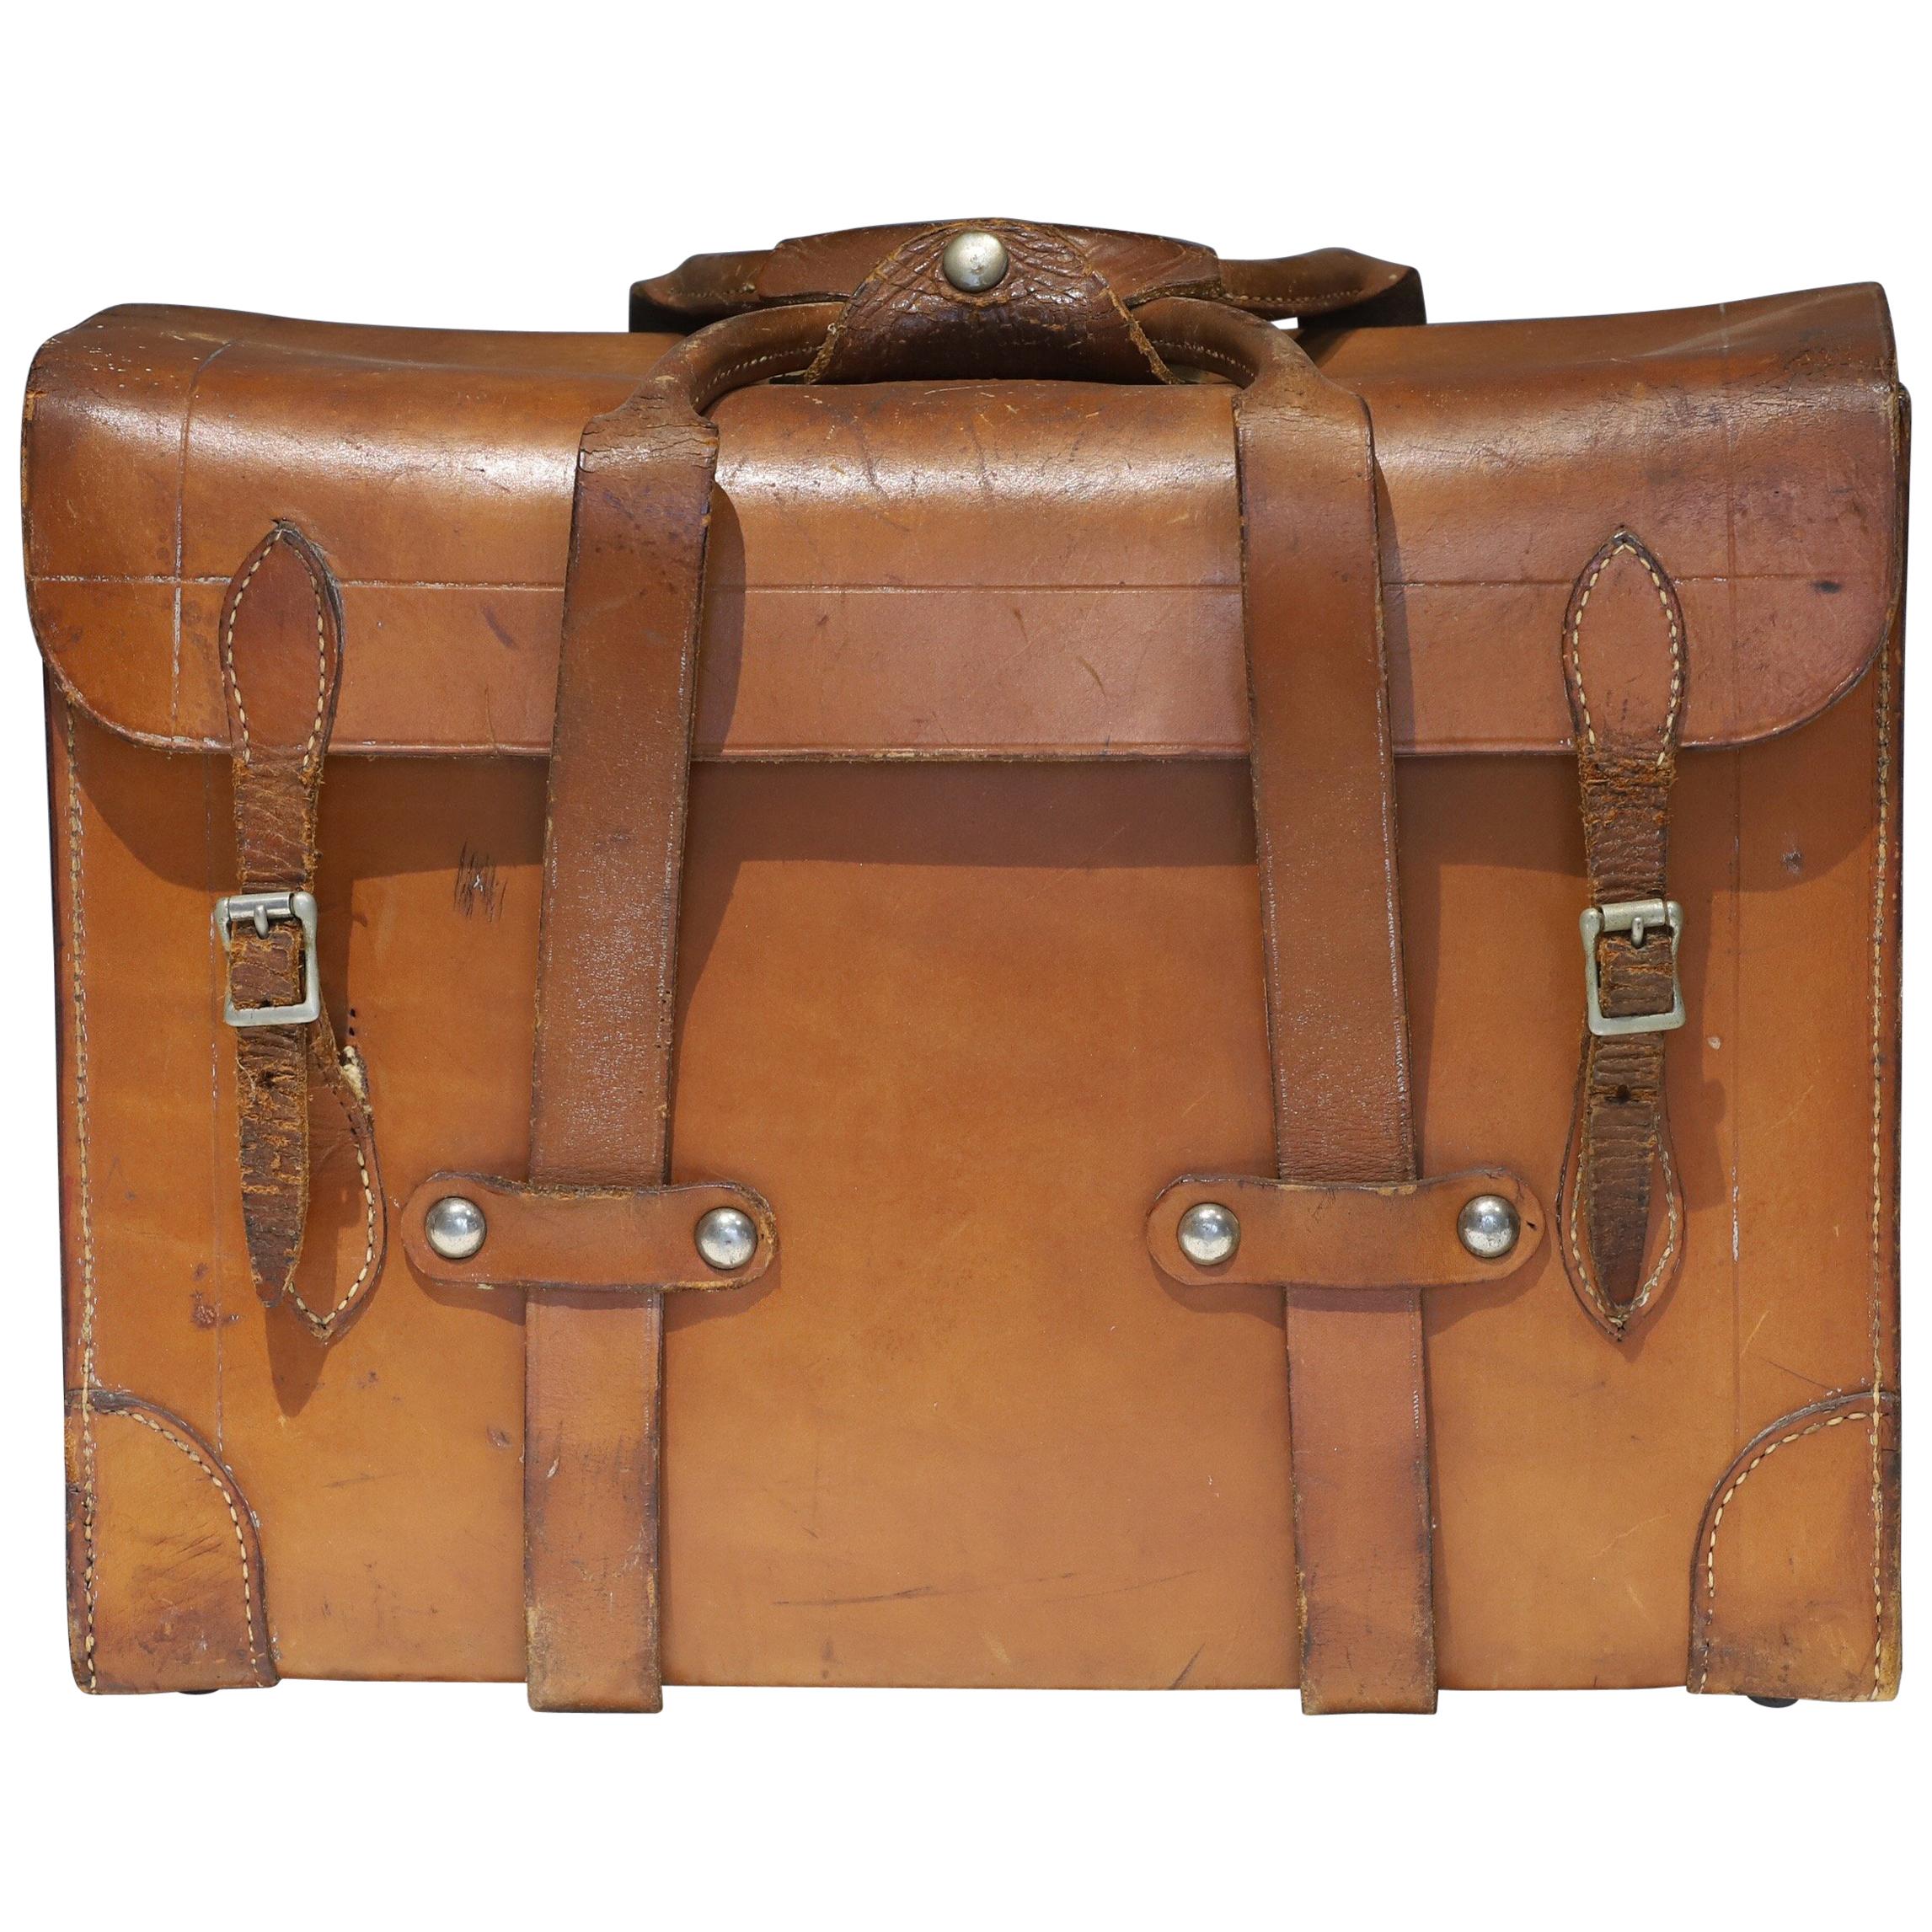 Wilkins Trunk Mfg. Co. Leather Briefcase Bag